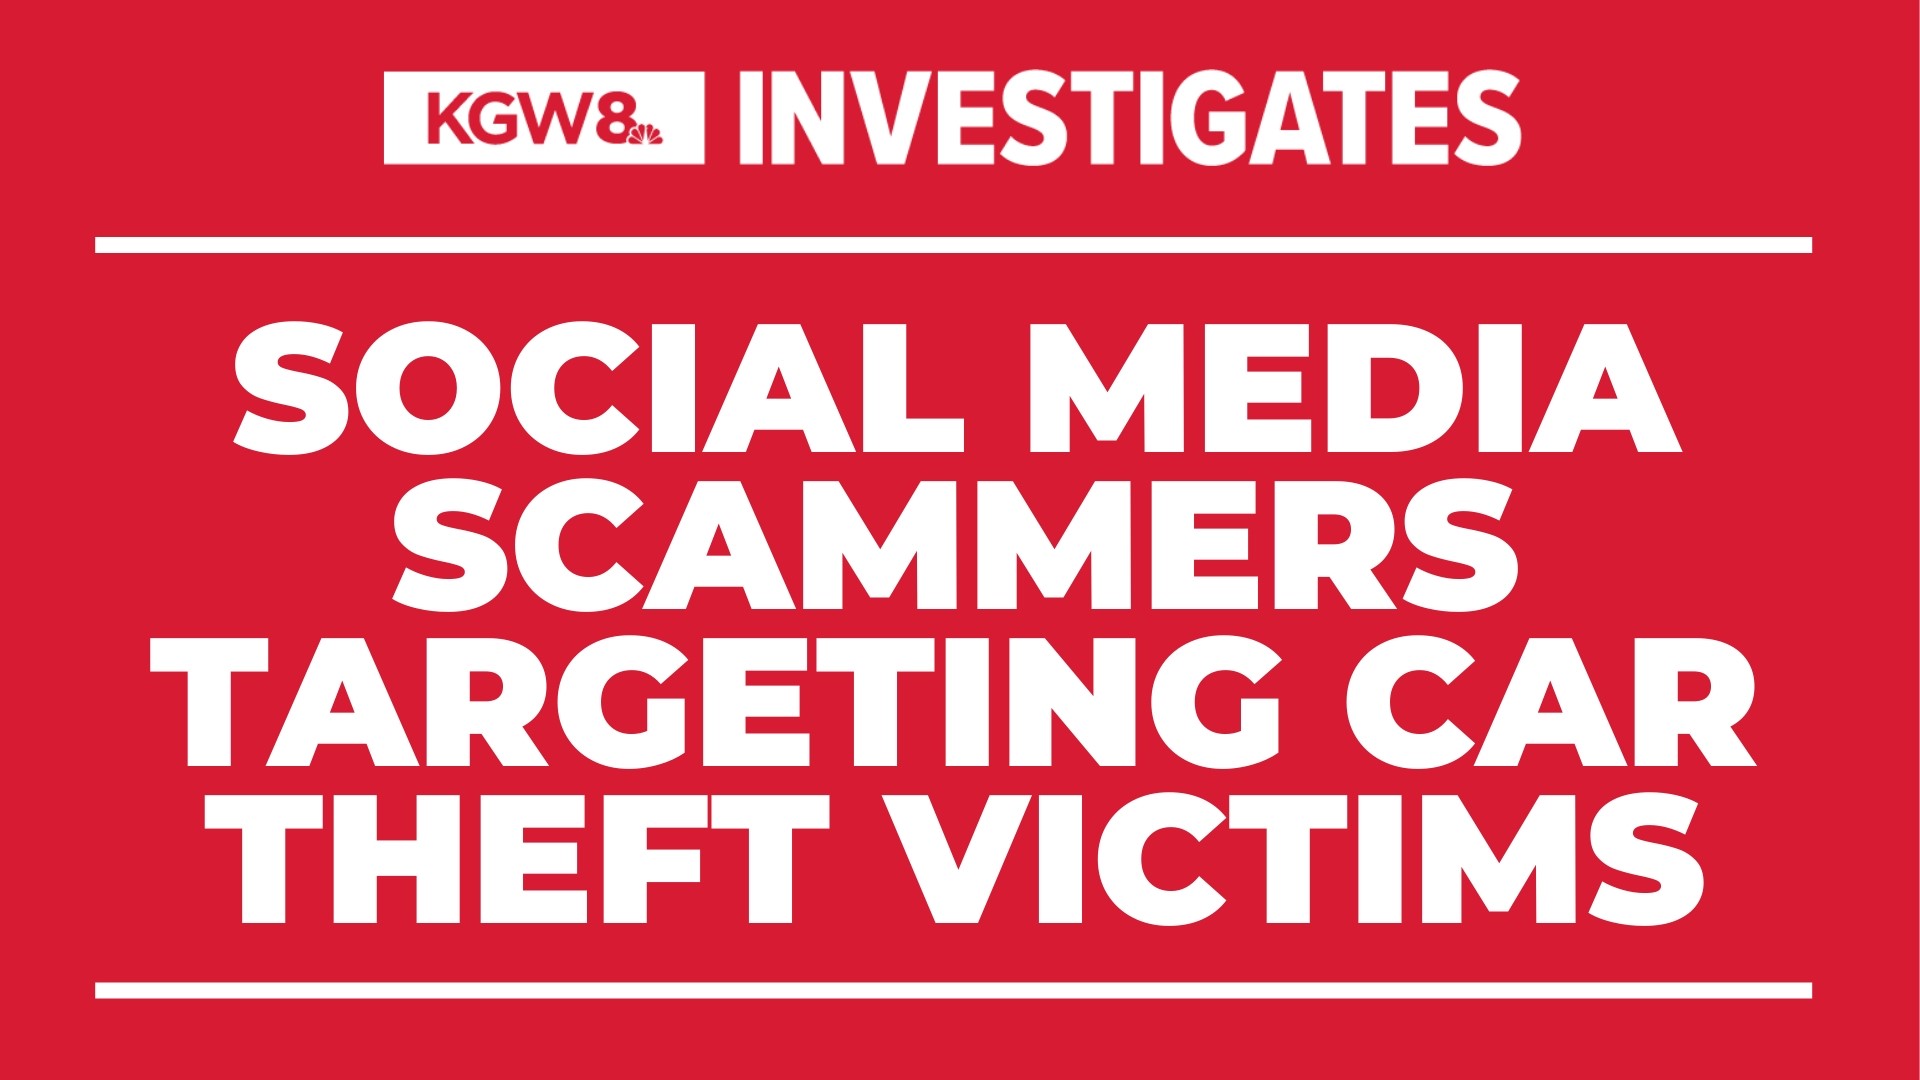 Scammers use social media to prey on people who’ve had their cars stolen. Don't pay, because volunteers are willing to help for free.